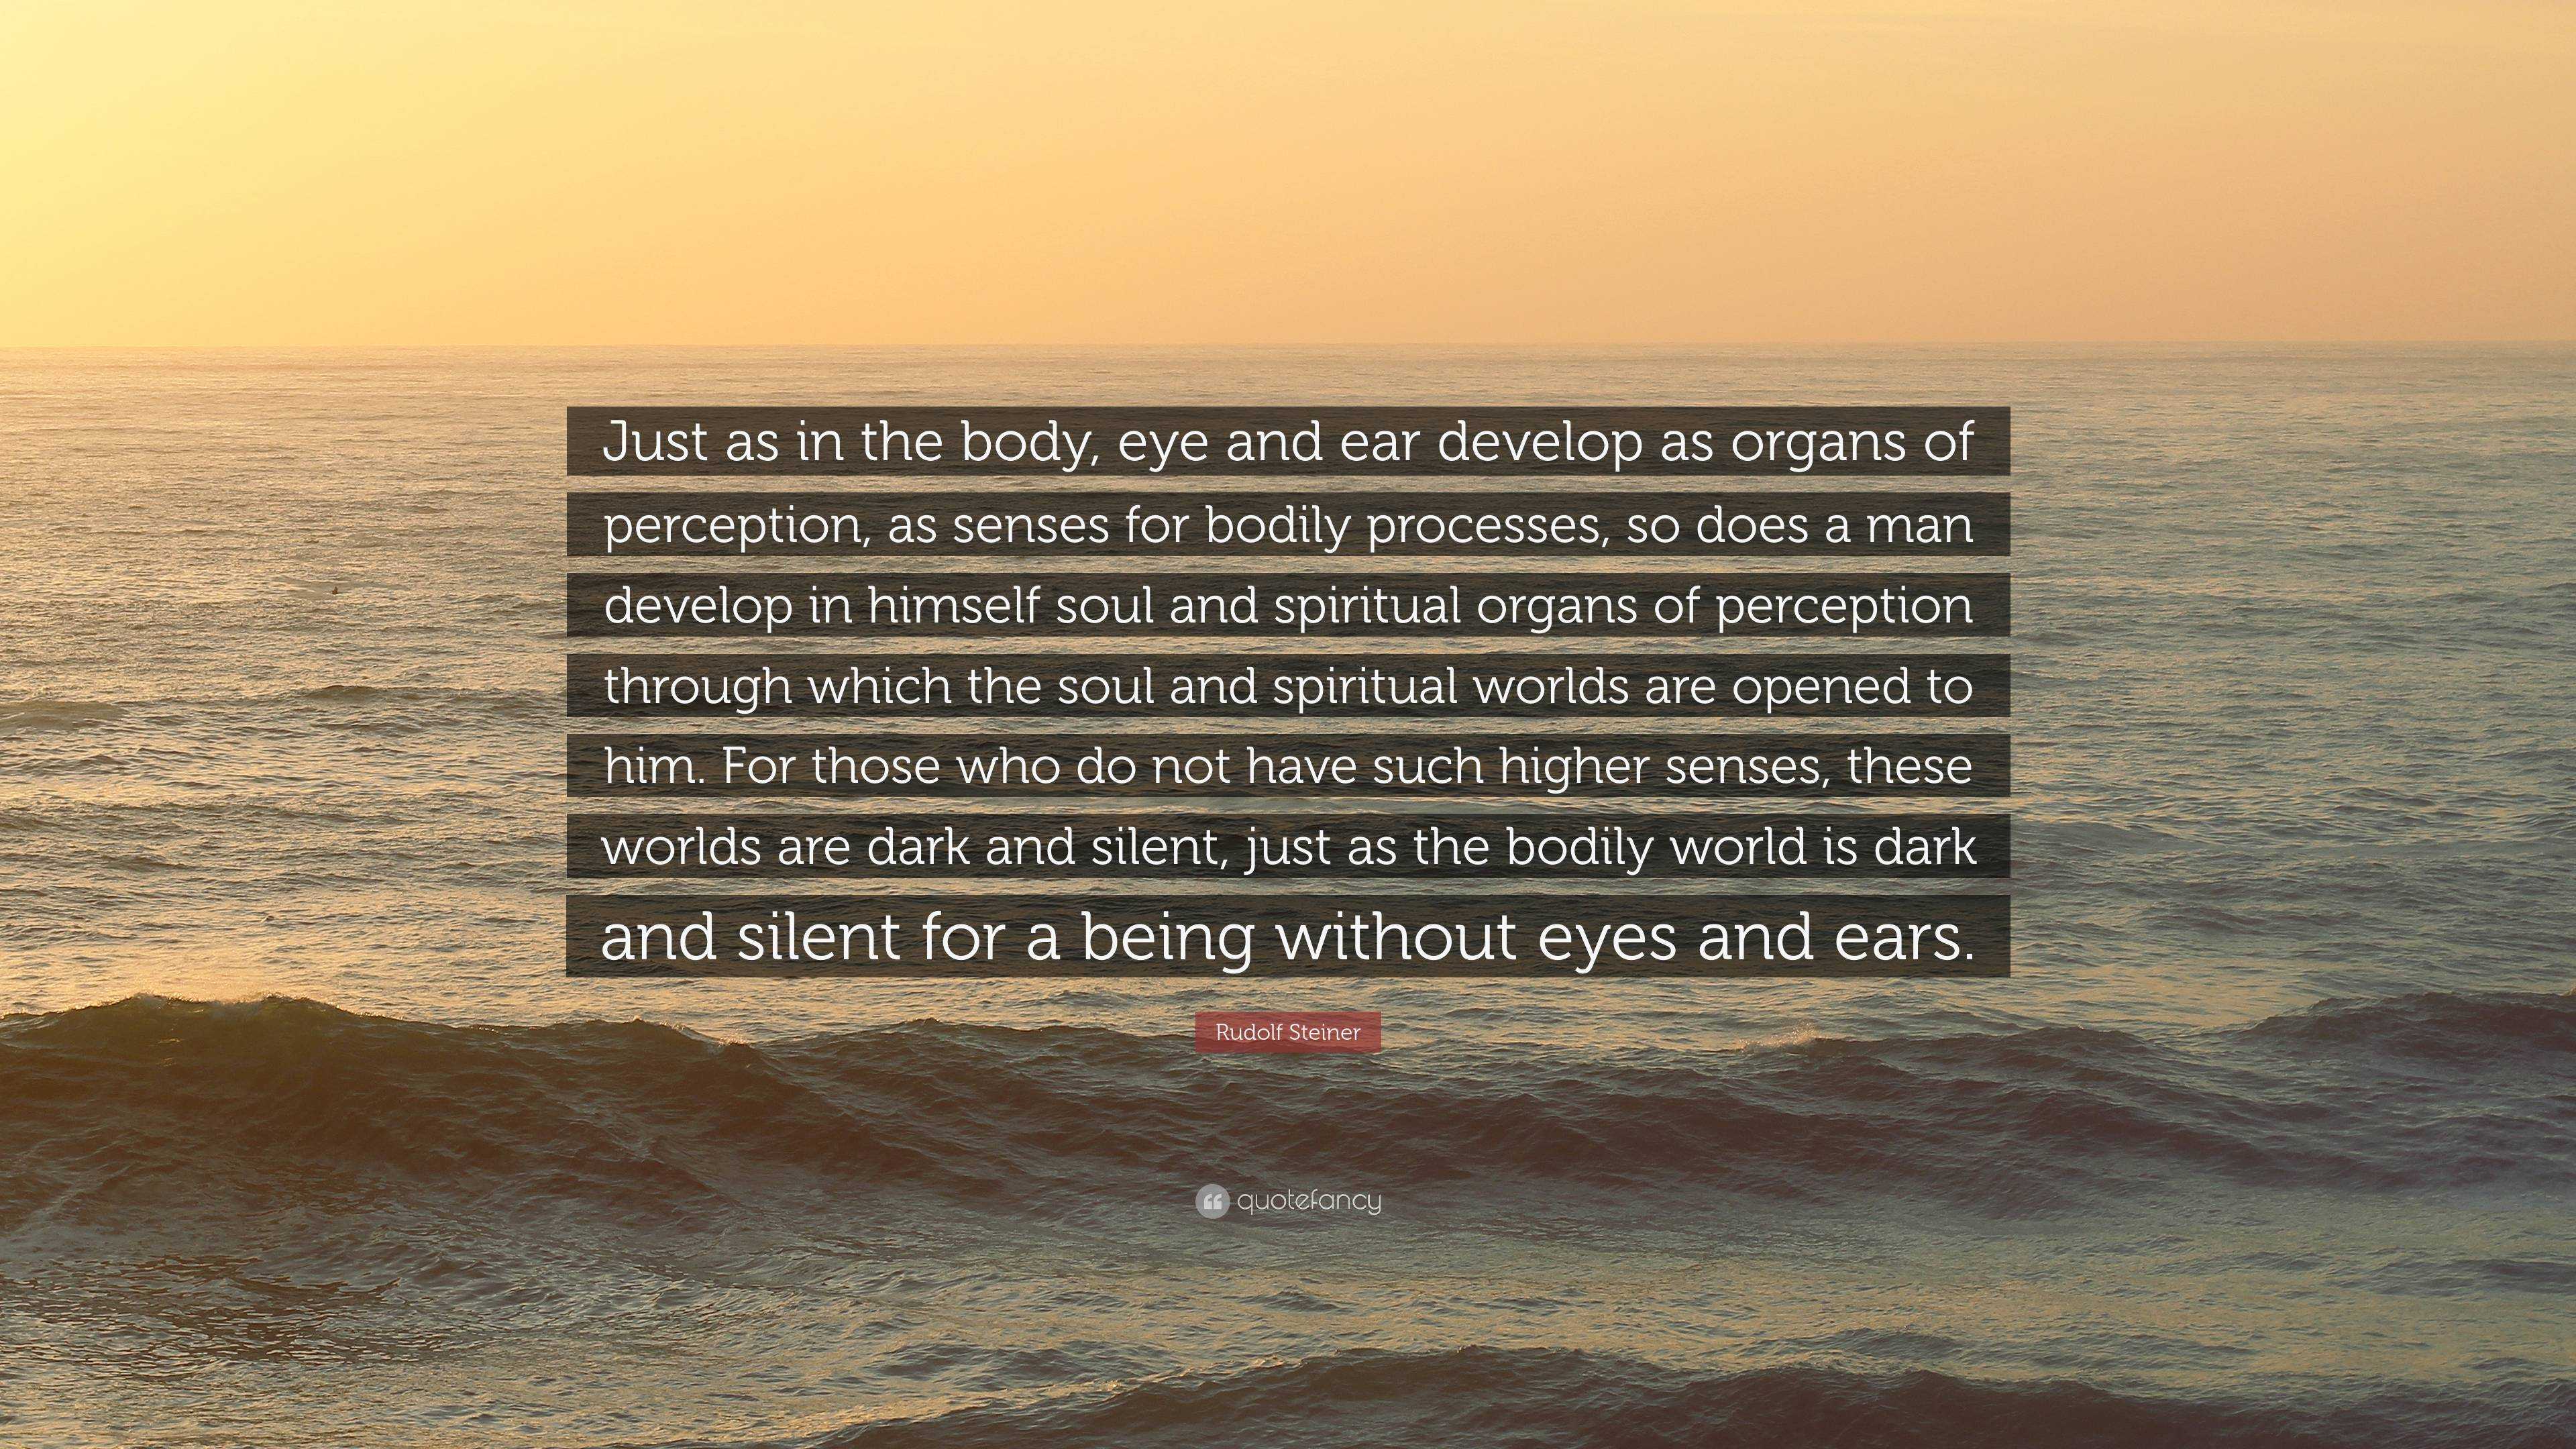 Rudolf Steiner Quote: “Just as in the body, eye and ear develop as ...